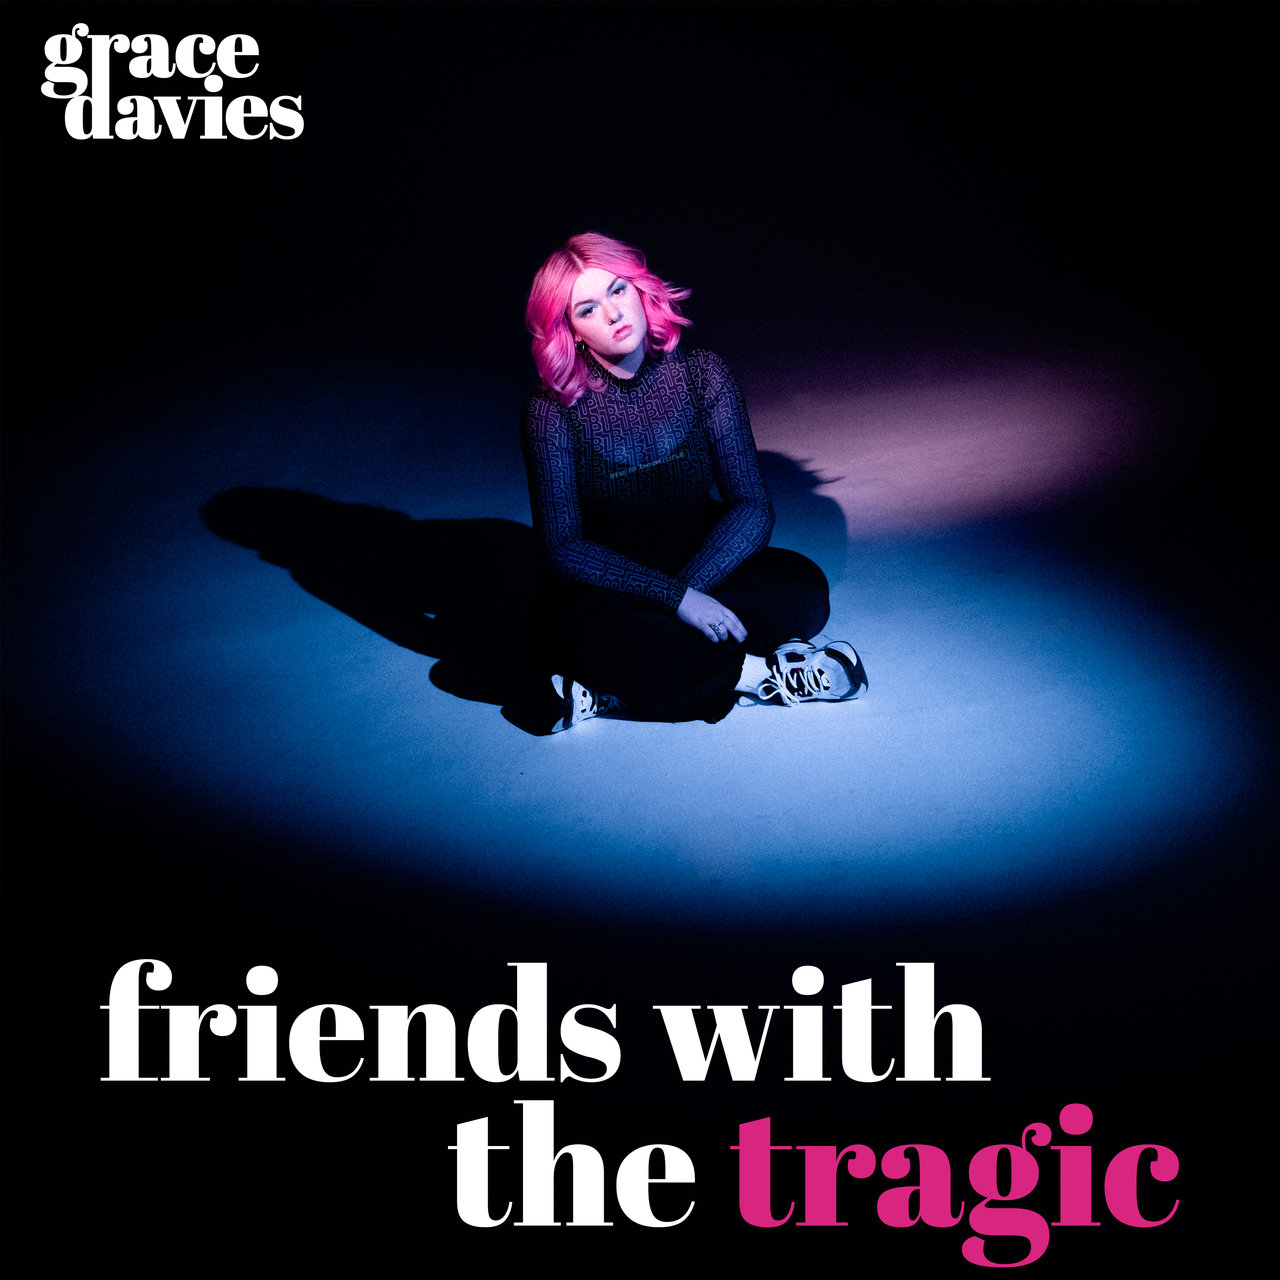 Grace Davies Friends with the Tragic cover artwork